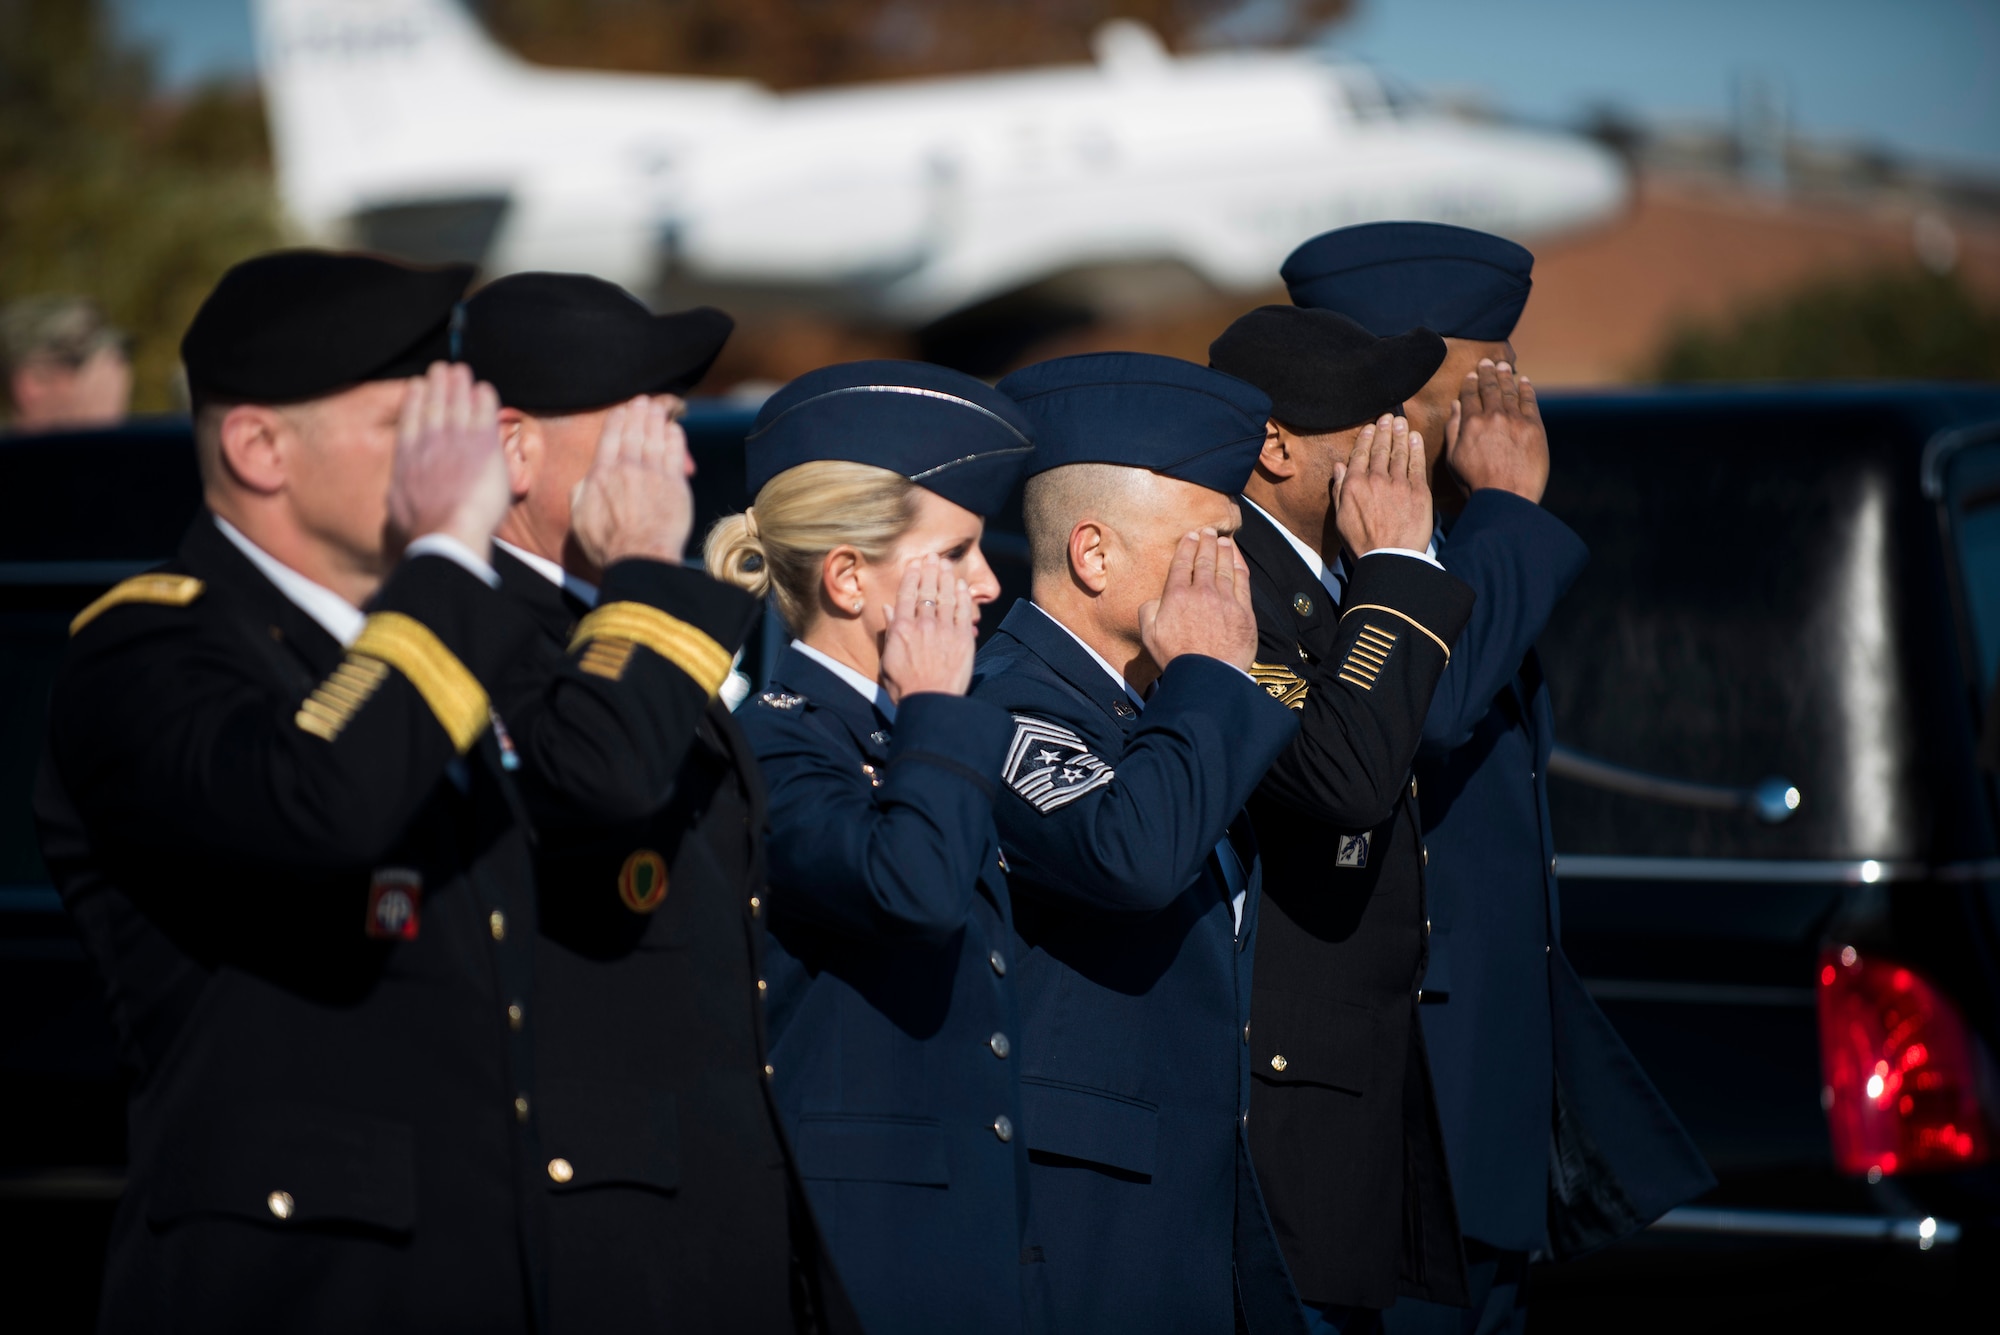 Senior leaders from Scott Air Force Base, Illinois salute during a dignified transfer ceremony for Pfc. Tyler Iubelt 21 Nov., 2016, at Scott Air Force Base, Illinois. Iubelt passed away on 12 Nov. while deployed to Bagram, Afghanistan. (U.S. Air Force photo by Staff Sgt. Clayton Lenhardt)